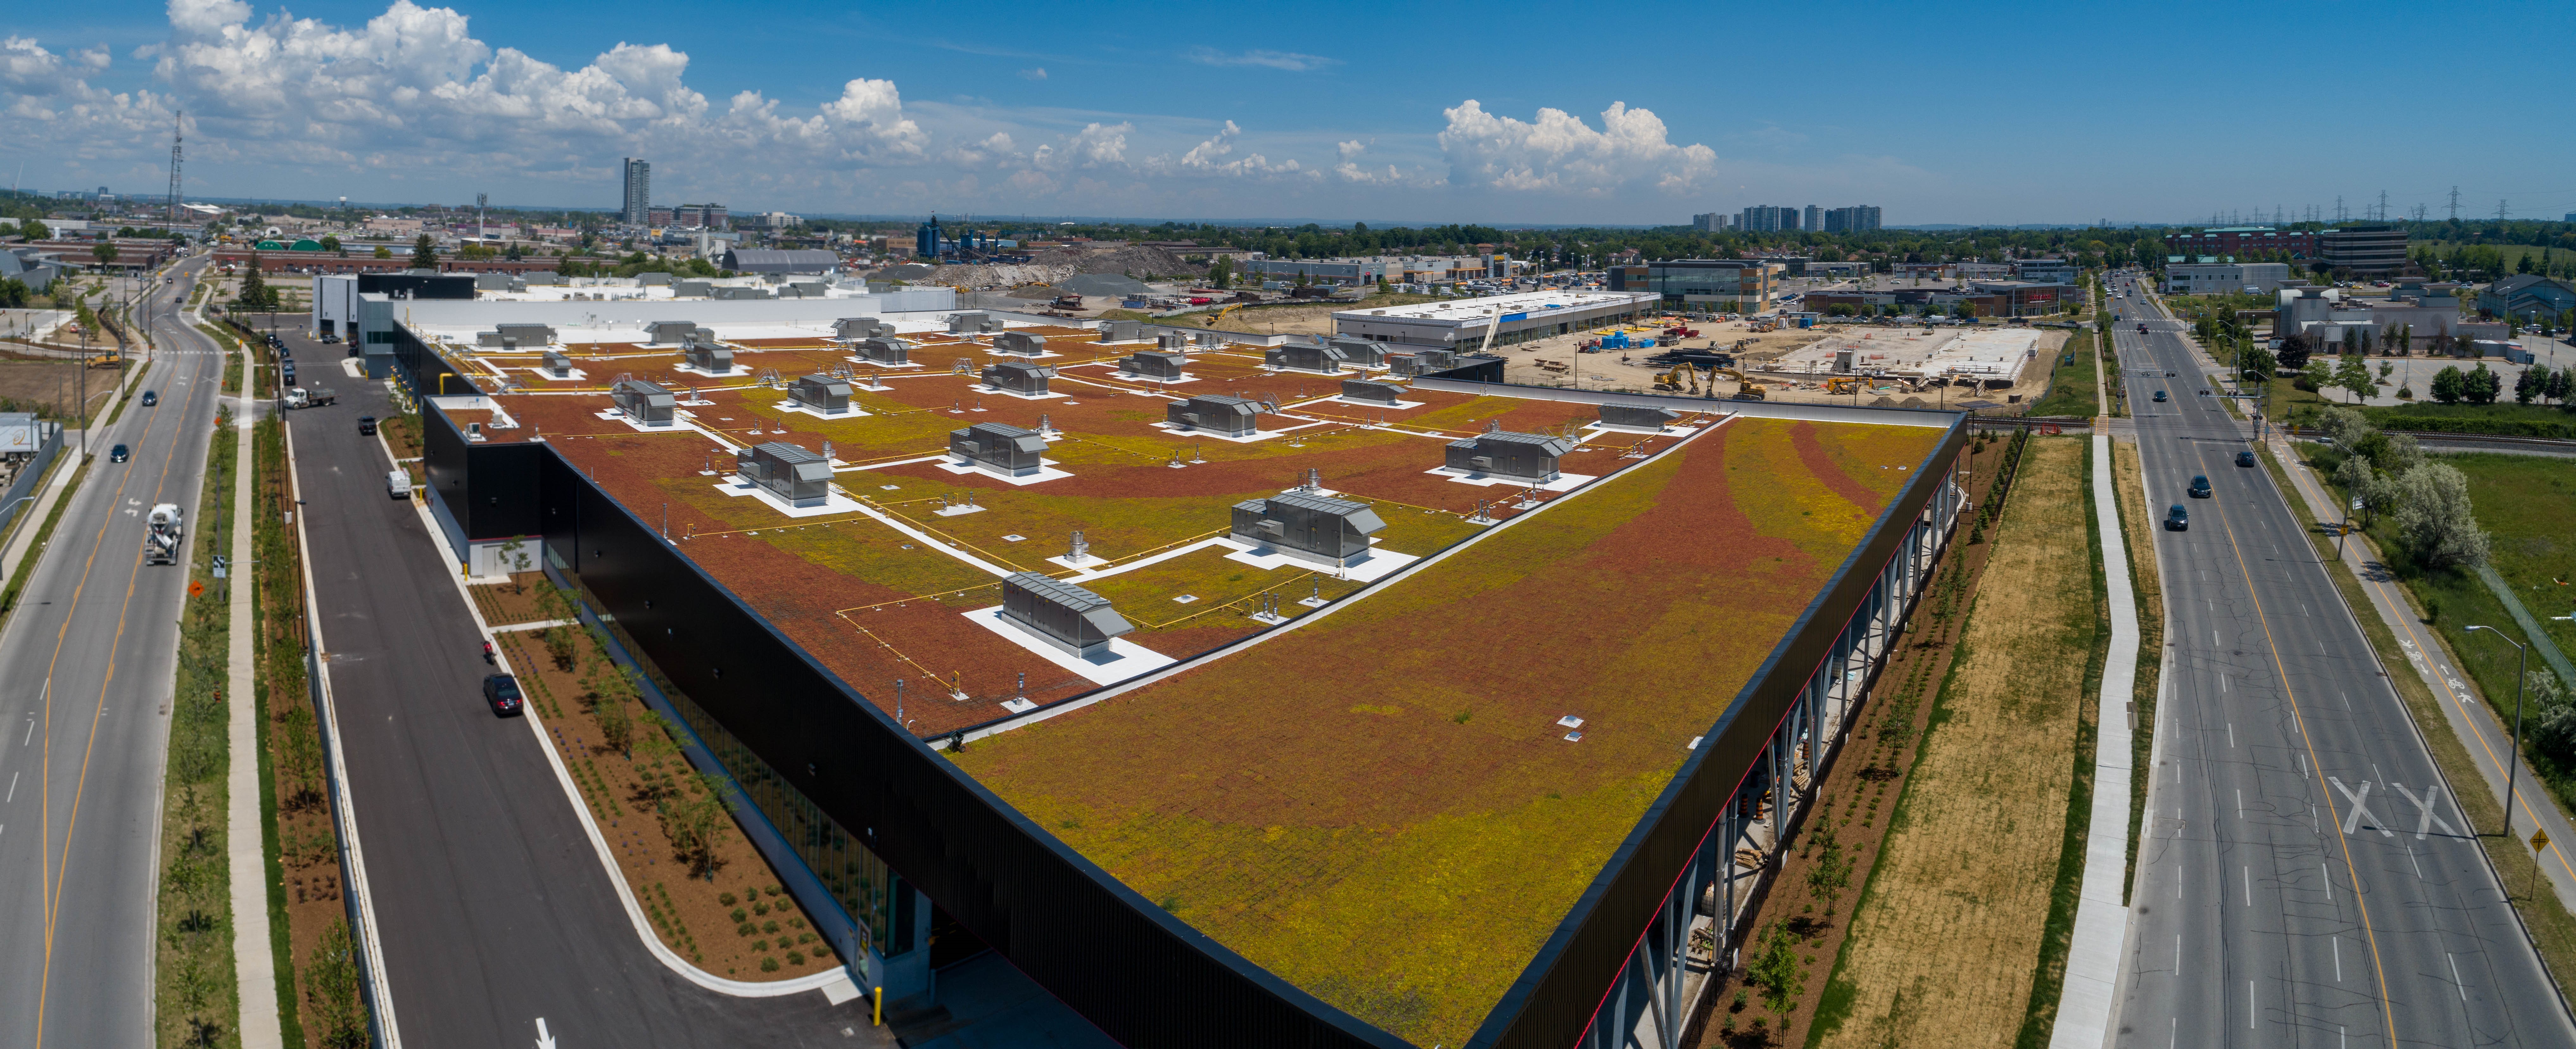 McNicoll Bus Garage Green Roof Arial